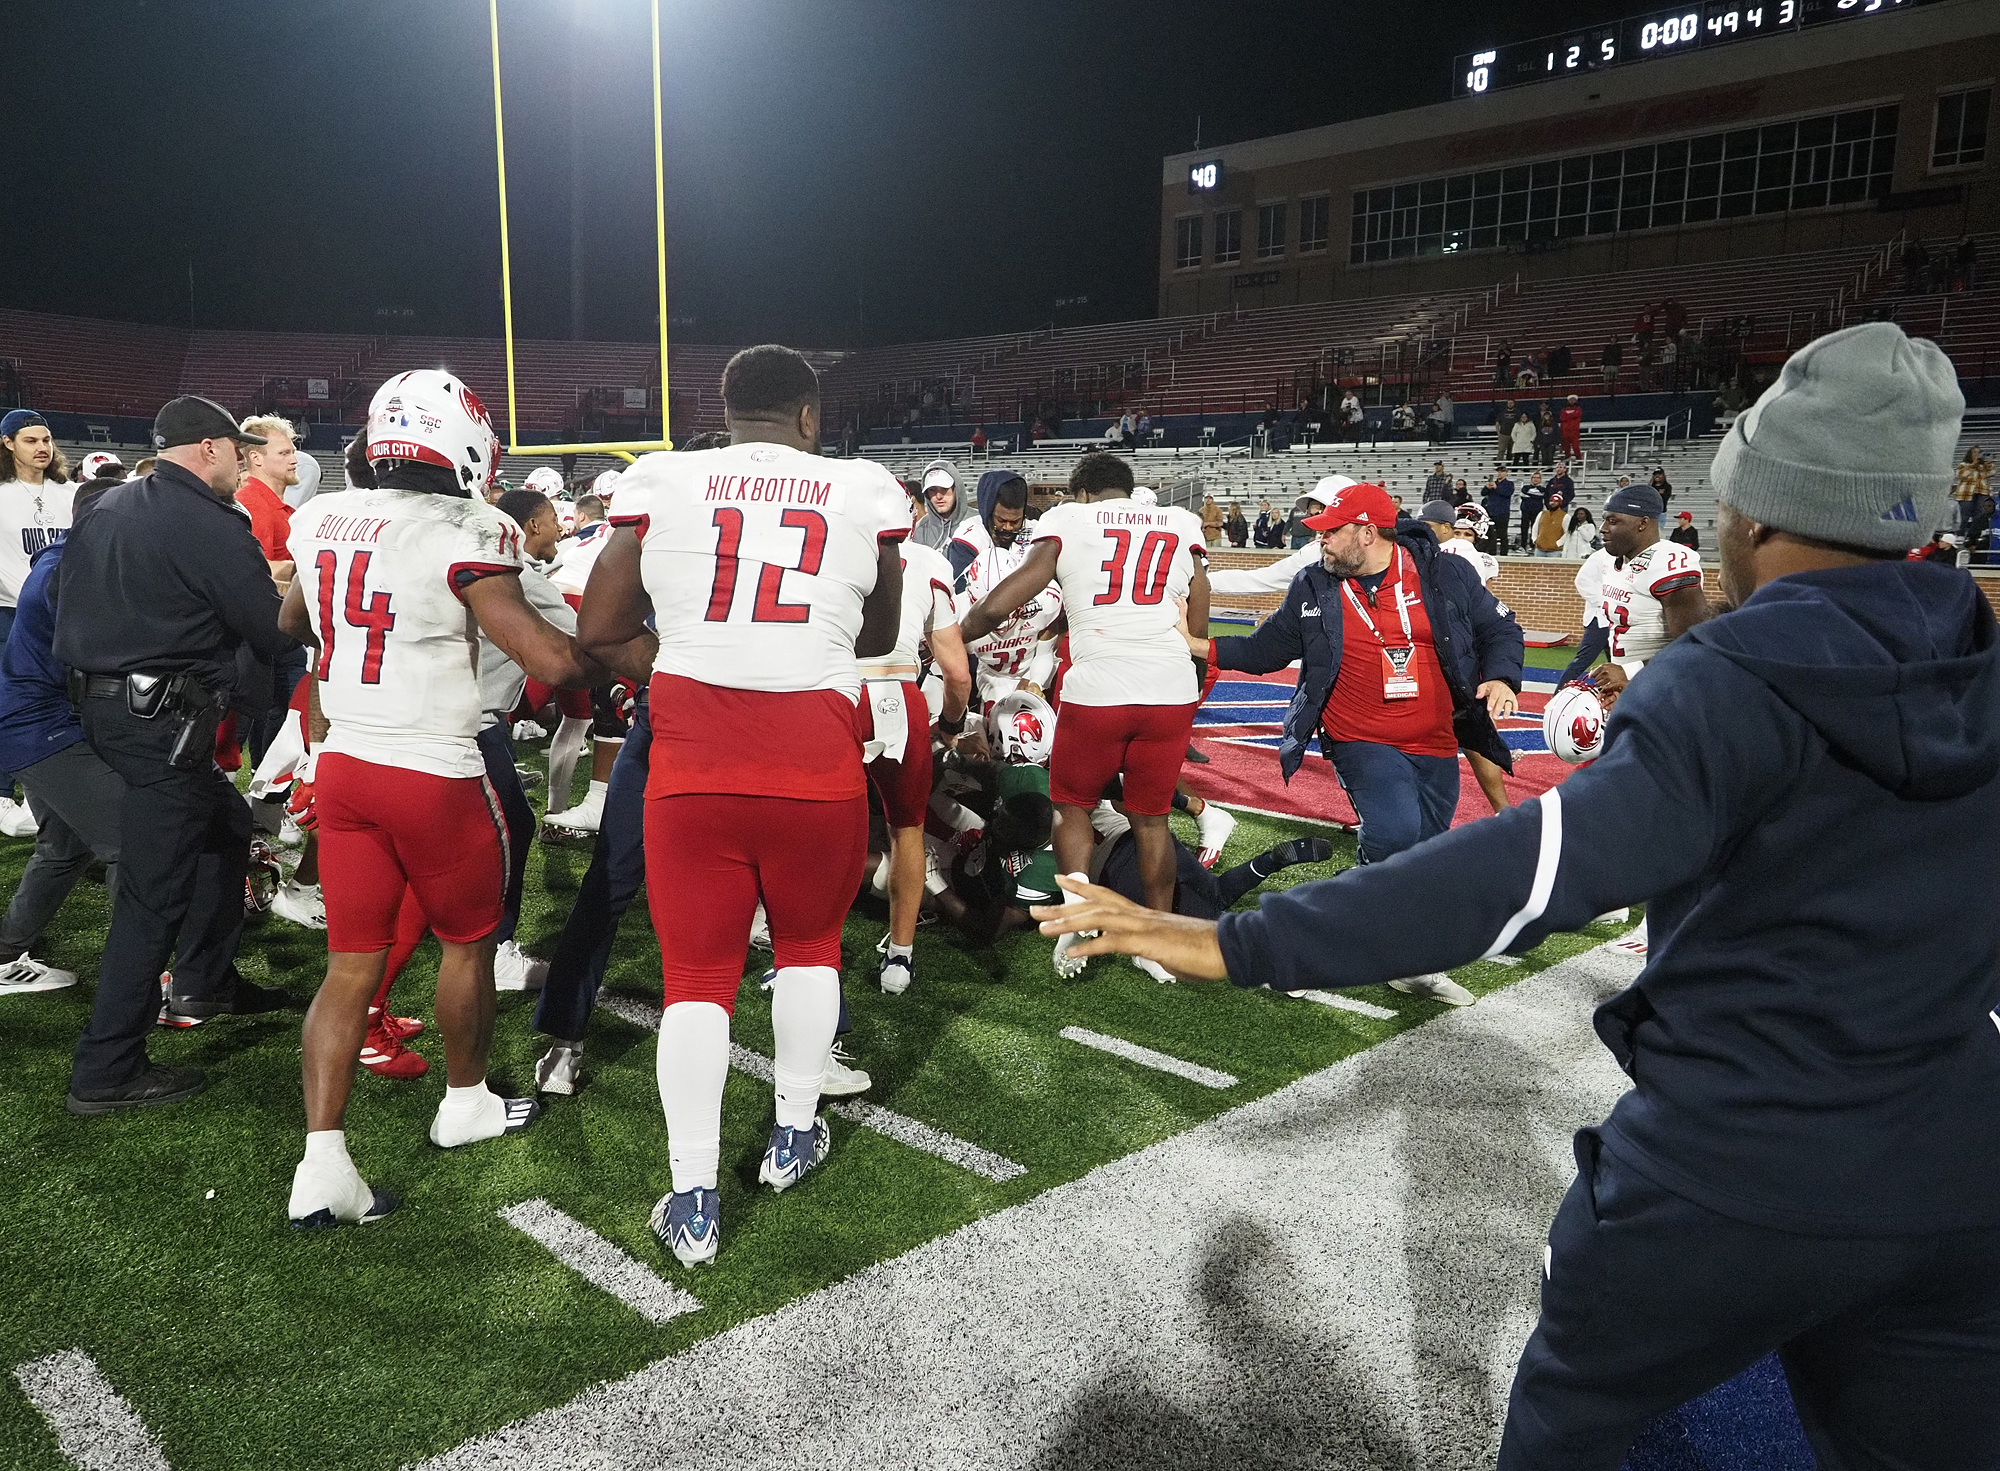 Fighting breaks out on the field after South Alabama’s 59-10 win in ’68 Ventures Bowl (Video)